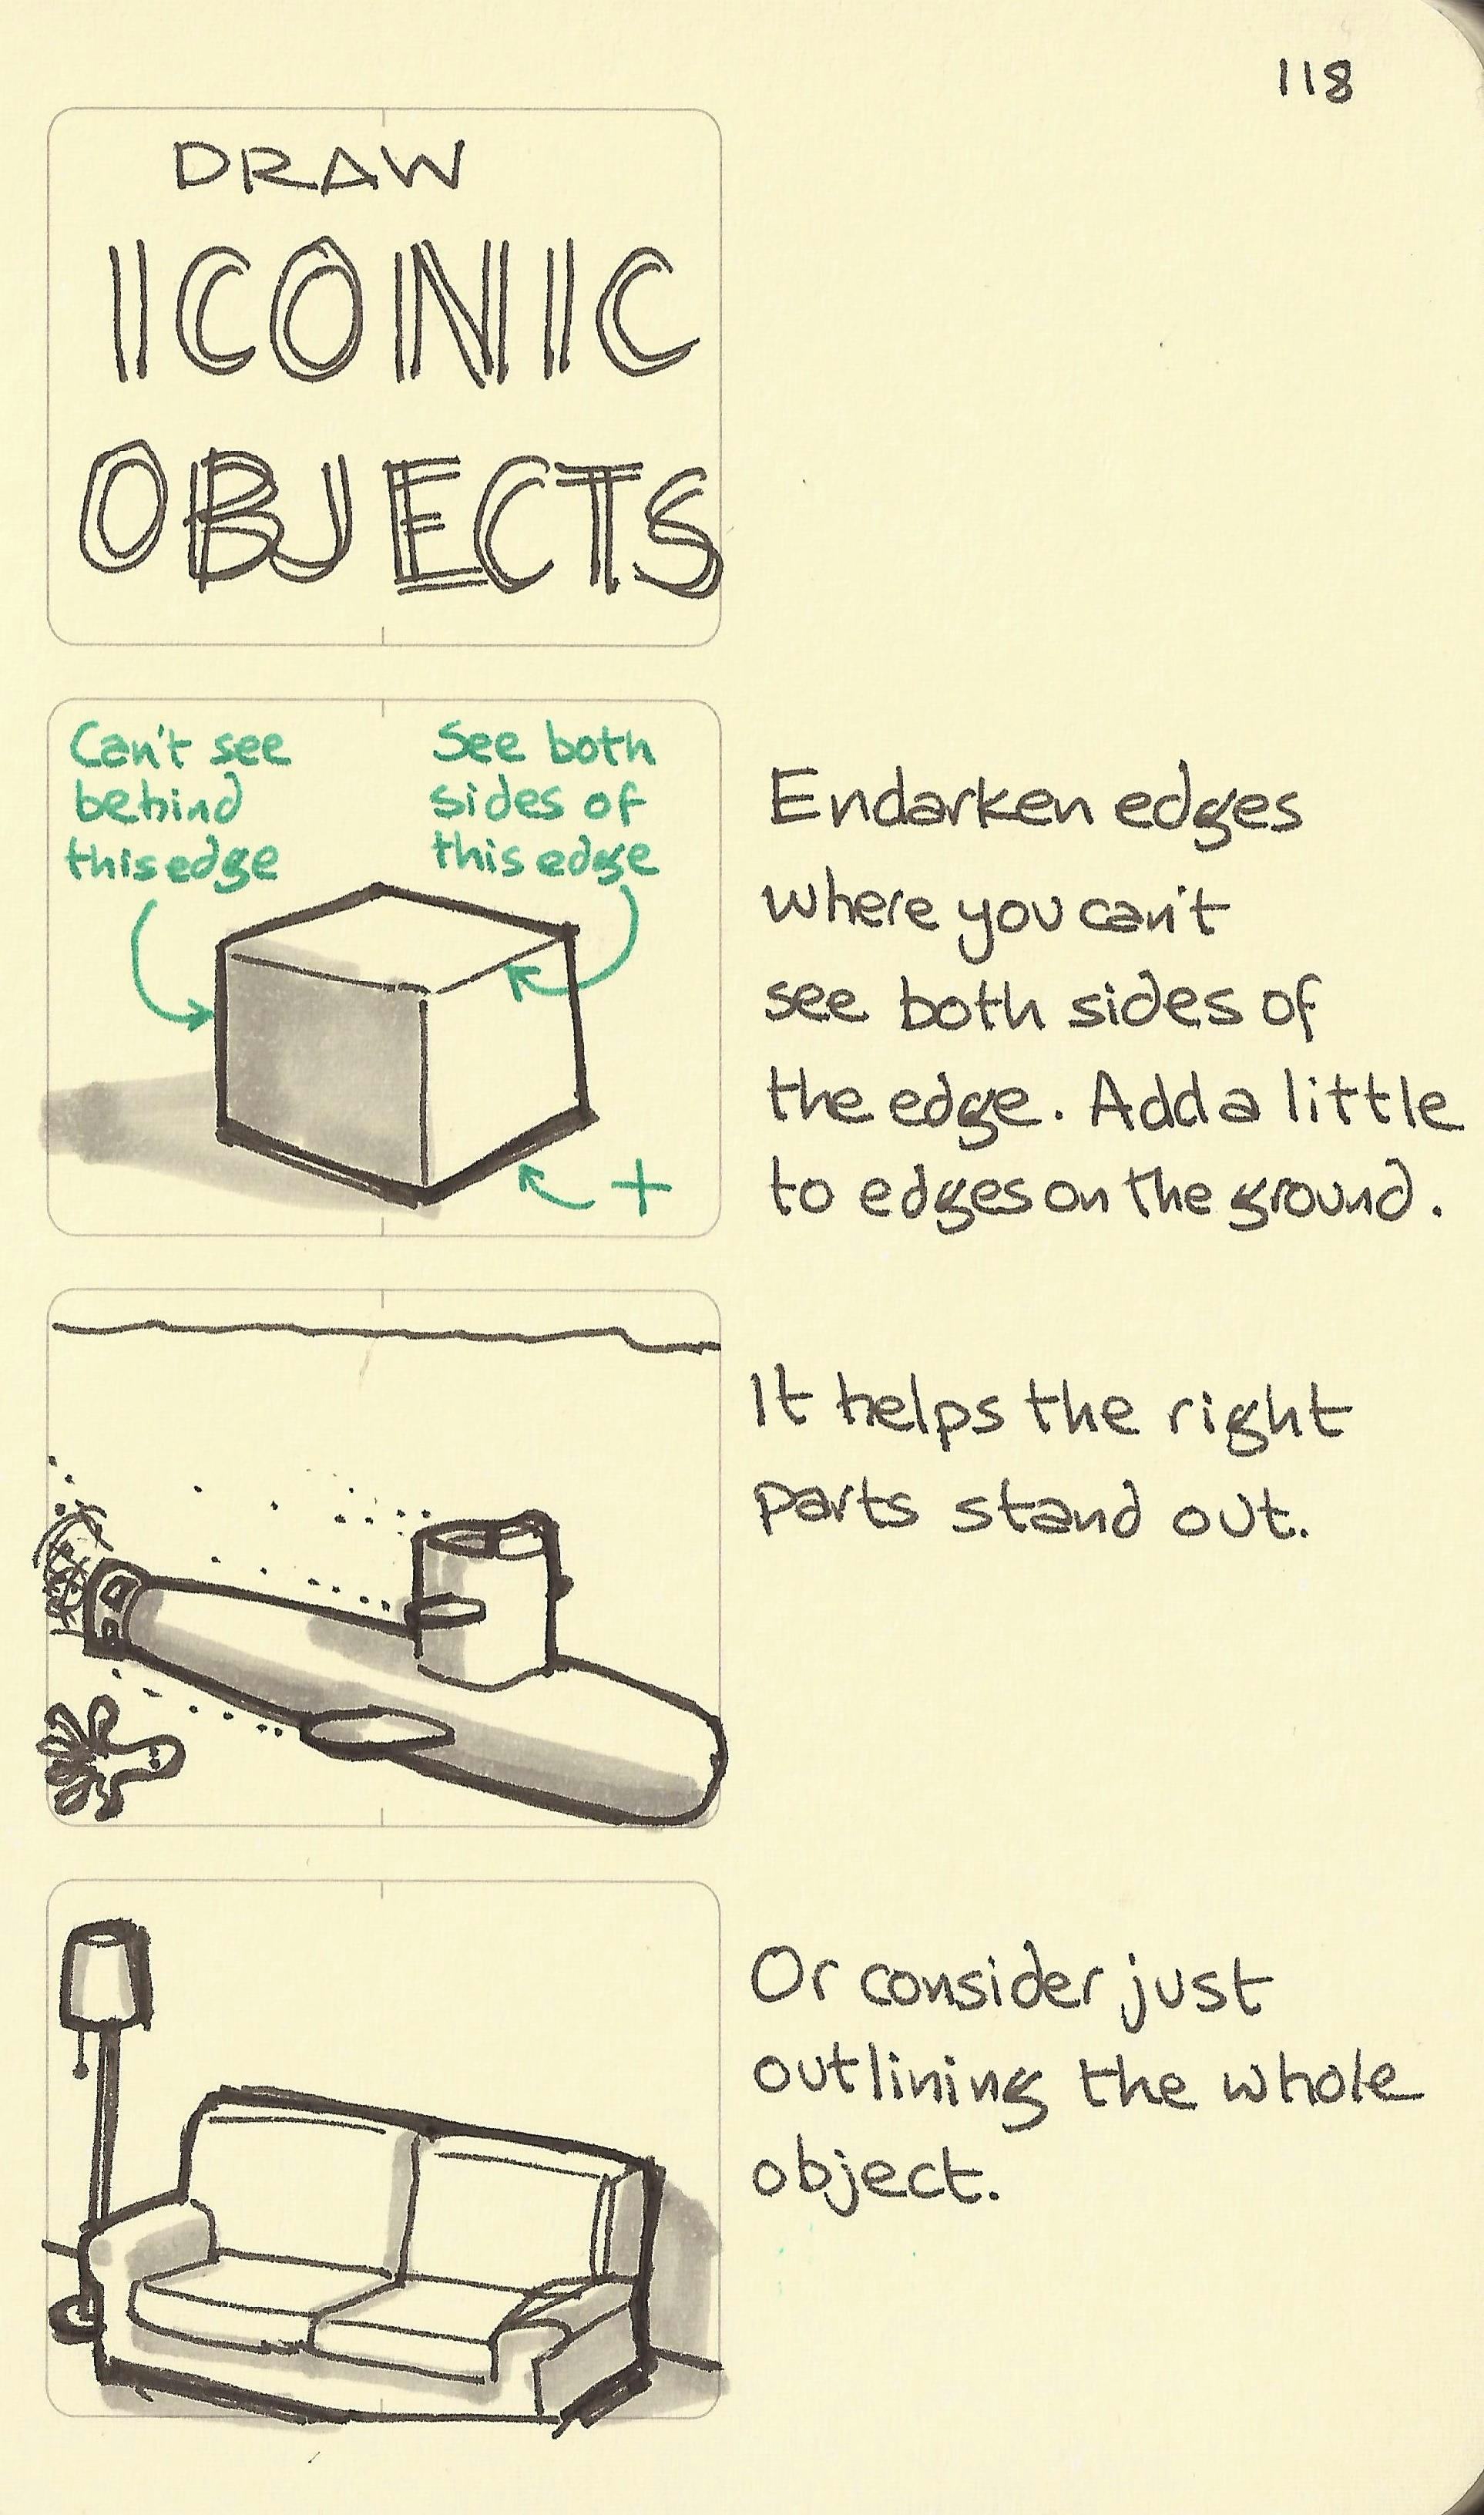 Draw iconic objects - Sketchplanations